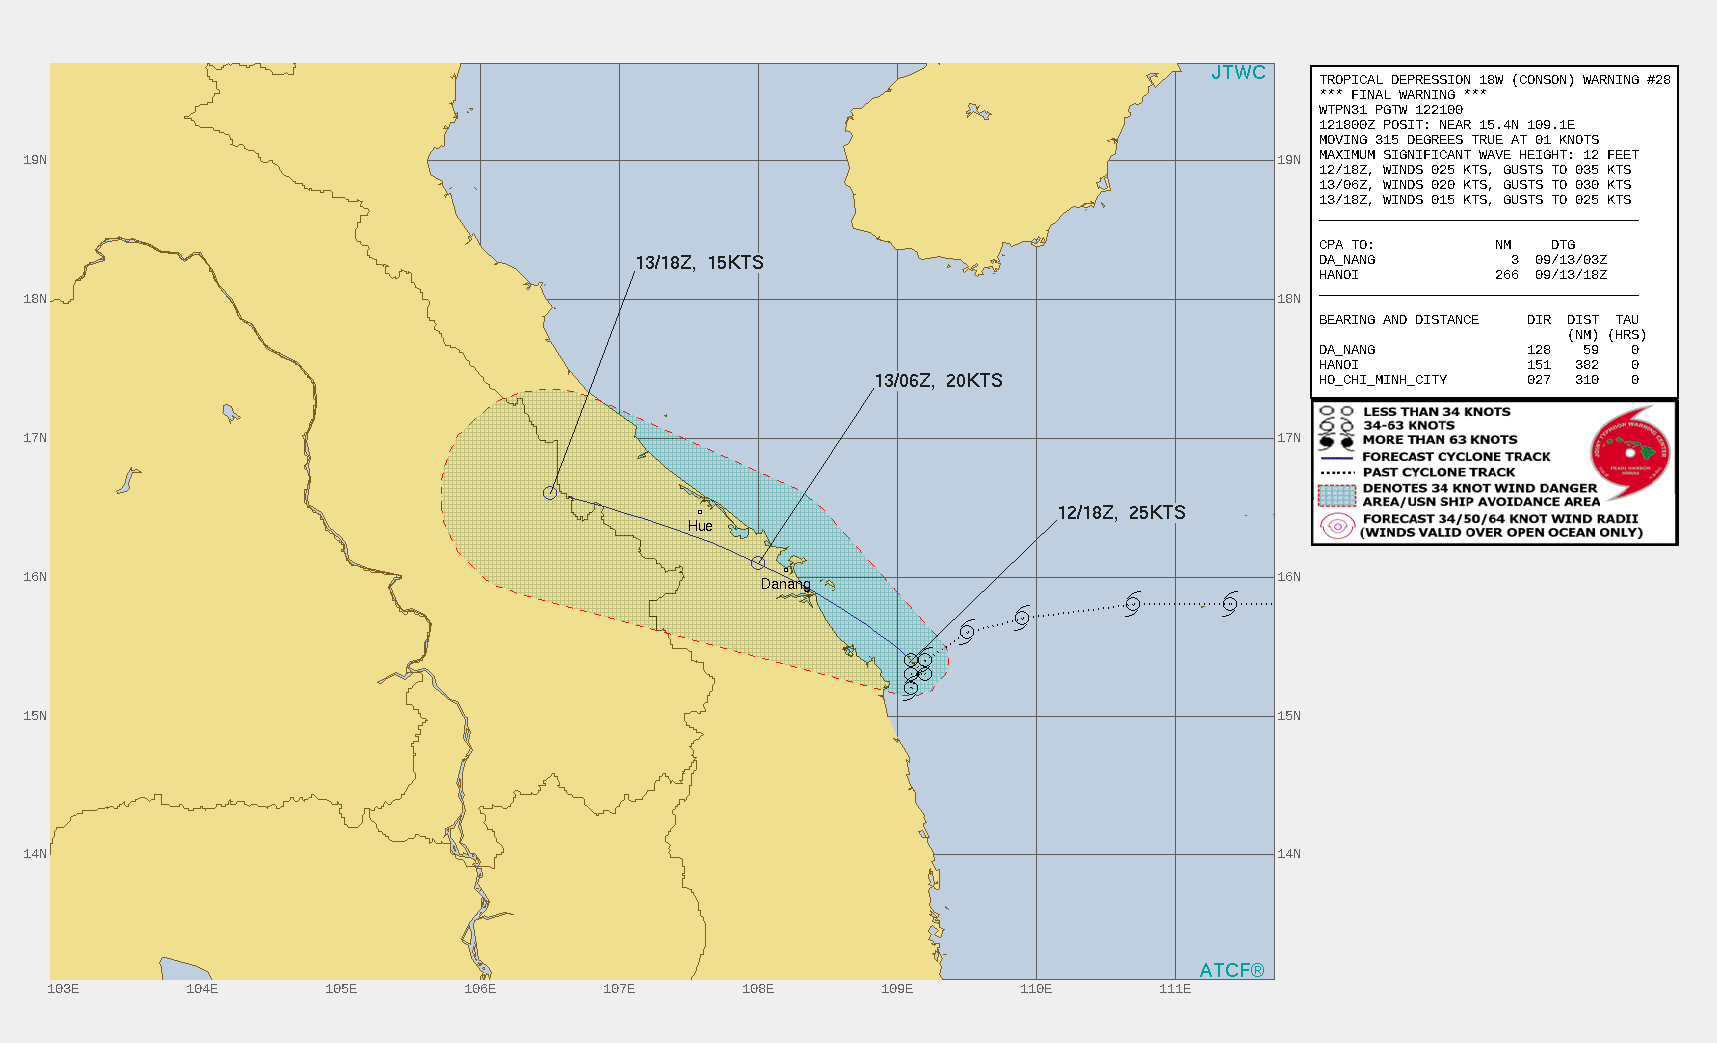 TD 18W(CONSON). WARNING 28/FINAL ISSUED AT 12/21UTC.REMARKS: 122100Z POSITION NEAR 15.6N 108.8E. 12SEP21. TROPICAL DEPRESSION (TD) 18W (CONSON), LOCATED APPROXIMATELY 110 KM SOUTHEAST OF DA NANG, VIETNAM, HAS TRACKED NORTHWESTWARD AT 02 KM/H OVER THE PAST SIX HOURS. ANIMATED ENHANCED INFRARED  SATELLITE IMAGERY AND ANIMATED RADAR IMAGERY DEPICT A DECAYING LOW- LEVEL CIRCULATION WITH A WEAKLY DEFINED CENTER. UPPER-LEVEL ANALYSIS  INDICATES UNFAVORABLE CONDITIONS WITH MODERATE TO STRONG EASTERLY  VERTICAL WIND SHEAR, WHICH WILL PERSIST THROUGH THE FORECAST PERIOD.  SURFACE OBSERVATIONS FROM QUANG NGAI, 40KM TO THE SOUTHWEST,  INDICATE STEADILY RISING SLP WITH A 12/18Z SLP VALUE AT 1001.4MB  REFLECTING THE STEADY WEAKENING TREND. THE SYSTEM IS FORECAST TO  TRACK NORTHWESTWARD INTO VIETNAM WITH DISSIPATION BY 12H. THIS IS  THE FINAL WARNING ON THIS SYSTEM BY THE JOINT TYPHOON WRNCEN PEARL  HARBOR HI. THE SYSTEM WILL BE CLOSELY MONITORED FOR SIGNS OF  REGENERATION. MAXIMUM SIGNIFICANT WAVE HEIGHT AT 121800Z IS 12 FEET.